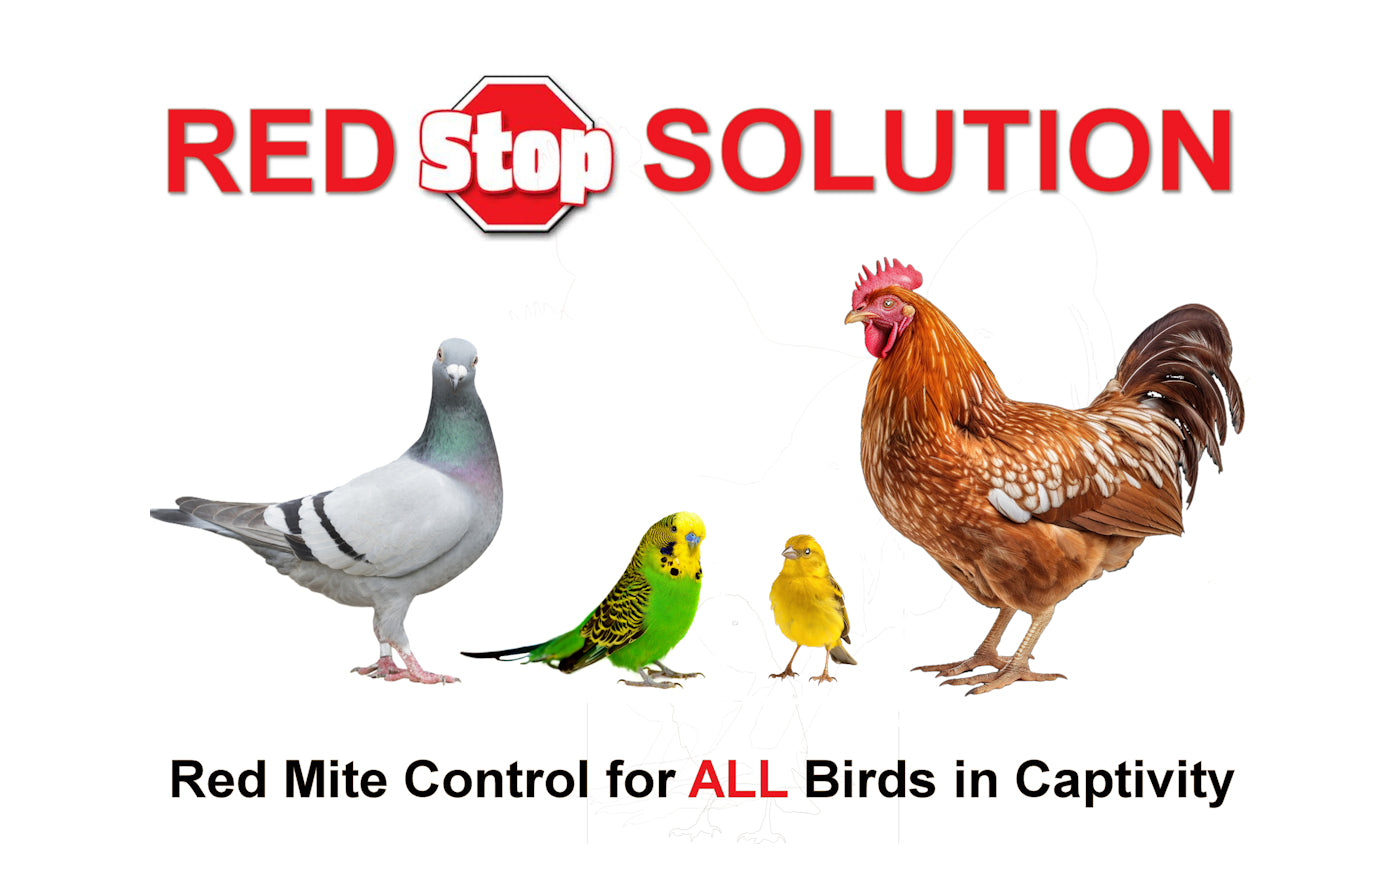 Red Stop Solution